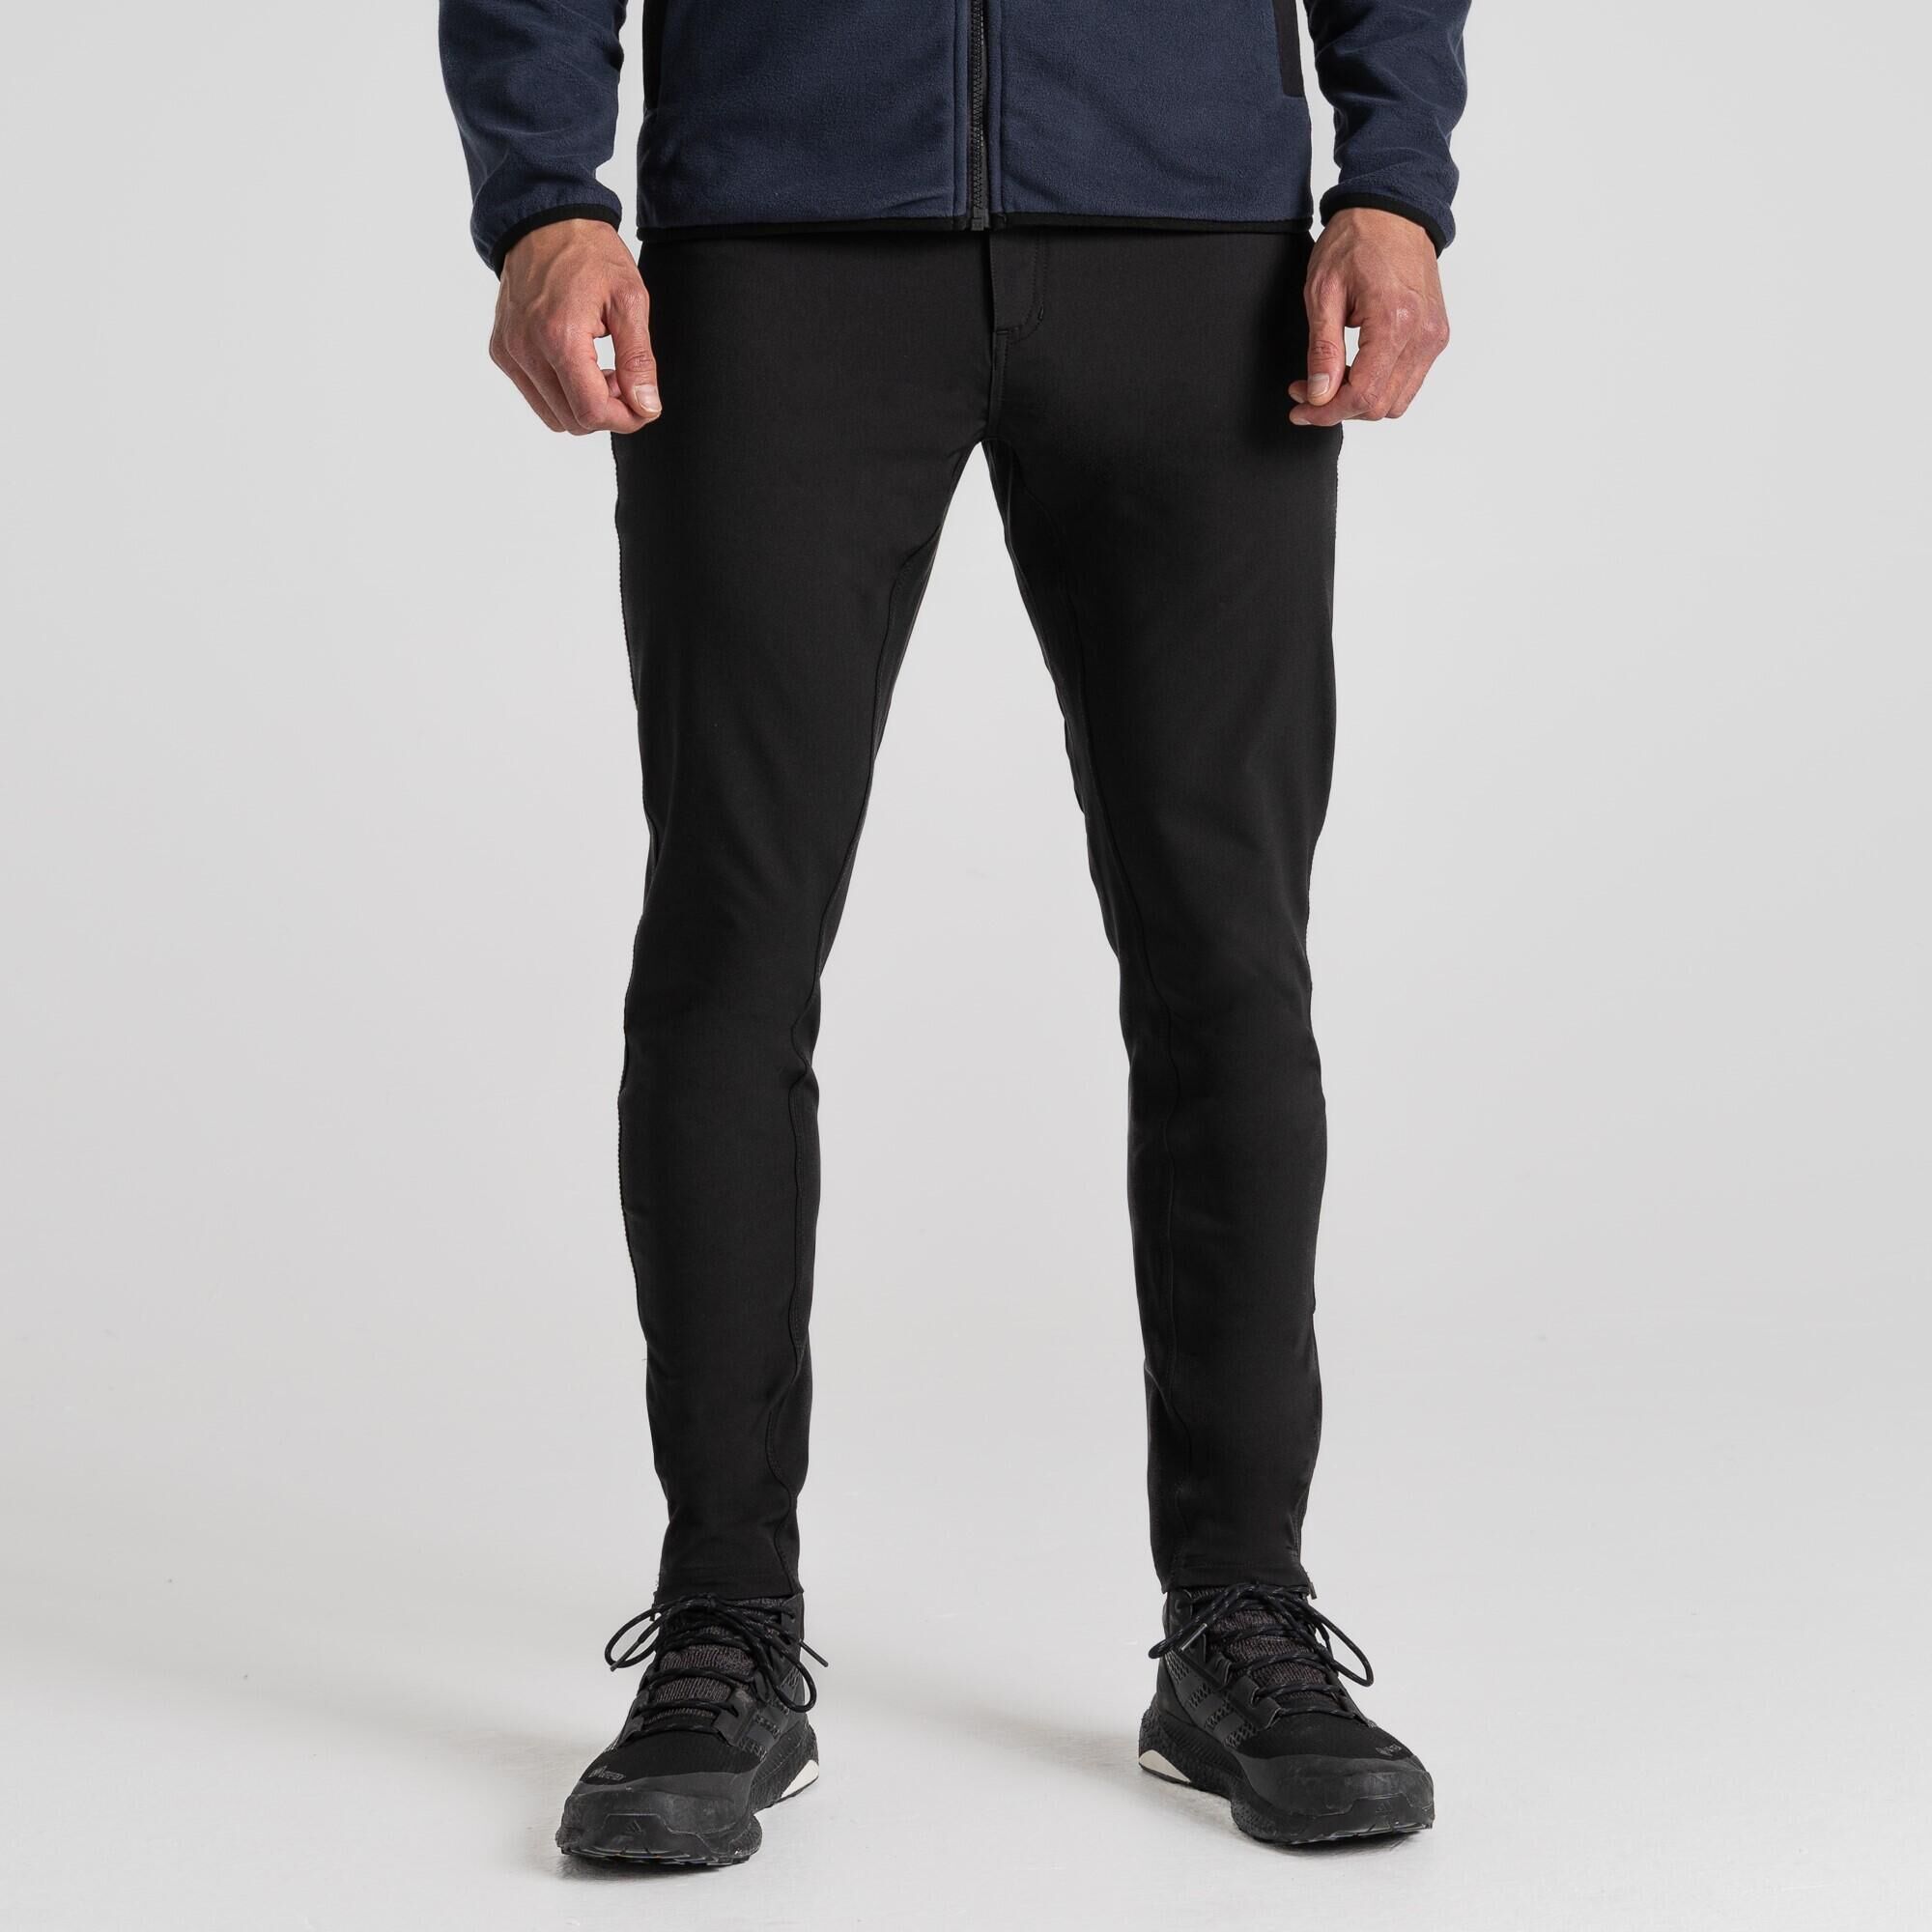 CRAGHOPPERS Mens Expedition Performance Pant